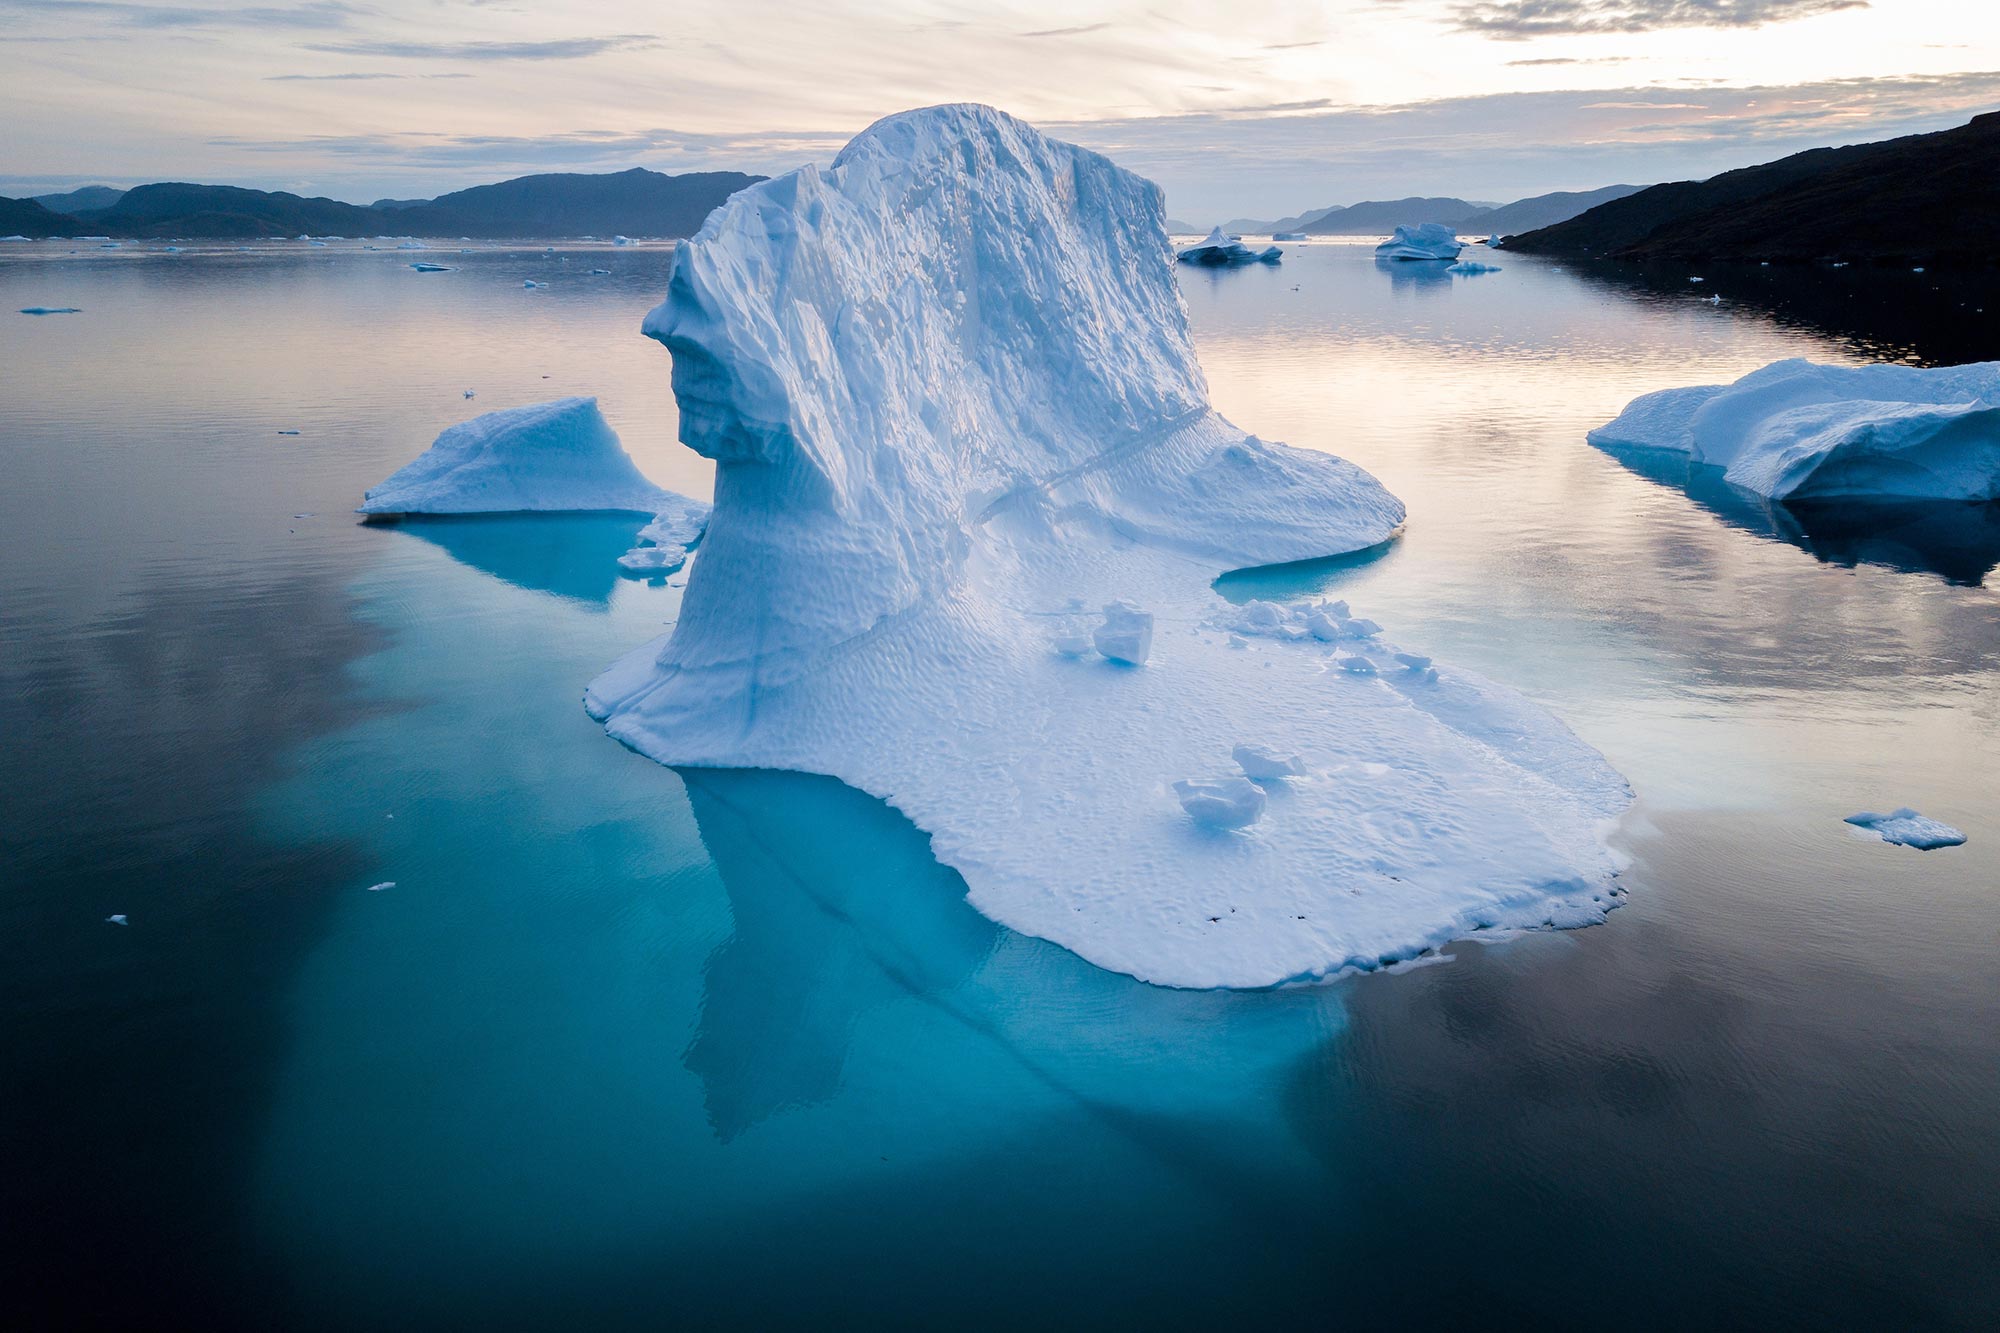 Icebergs are among the most sought-after photo opportunities while sightseeing in Greenland.